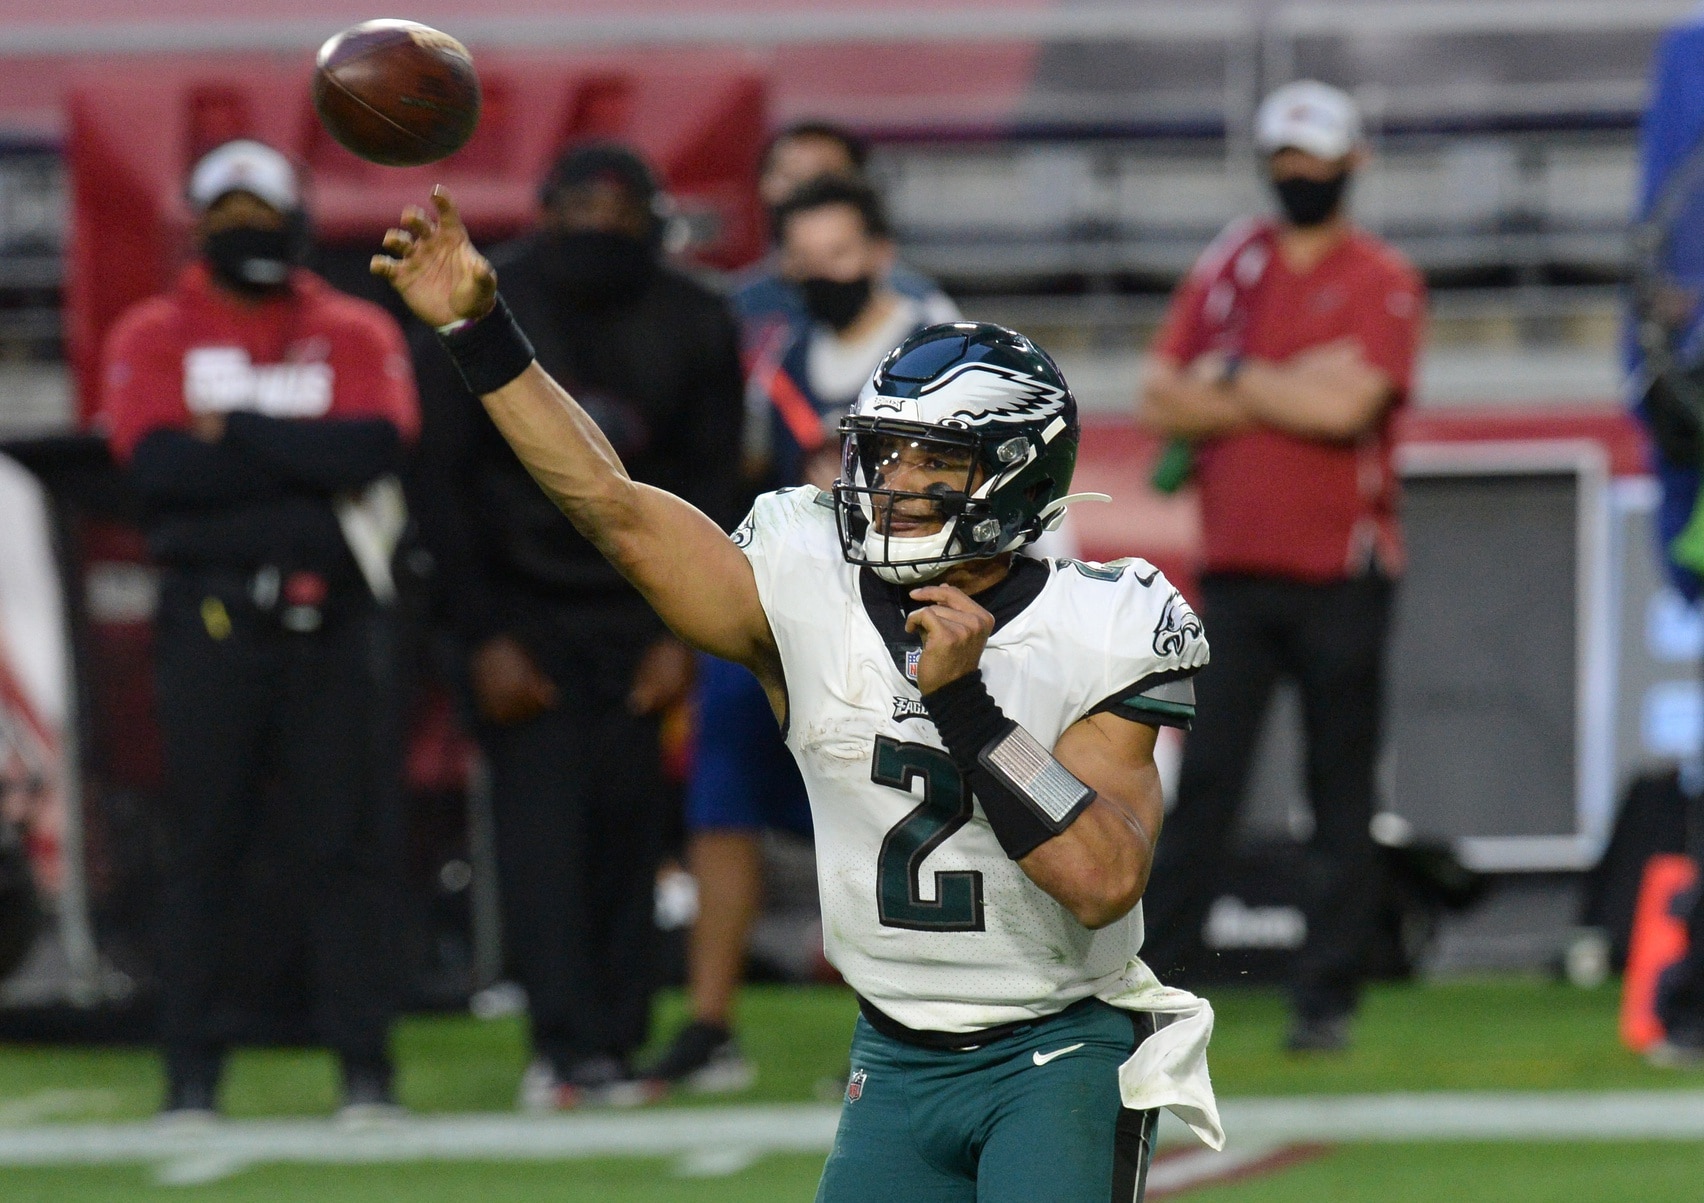 Eagles vs. Cowboys Line: Philly Favored for First Time with Hurts